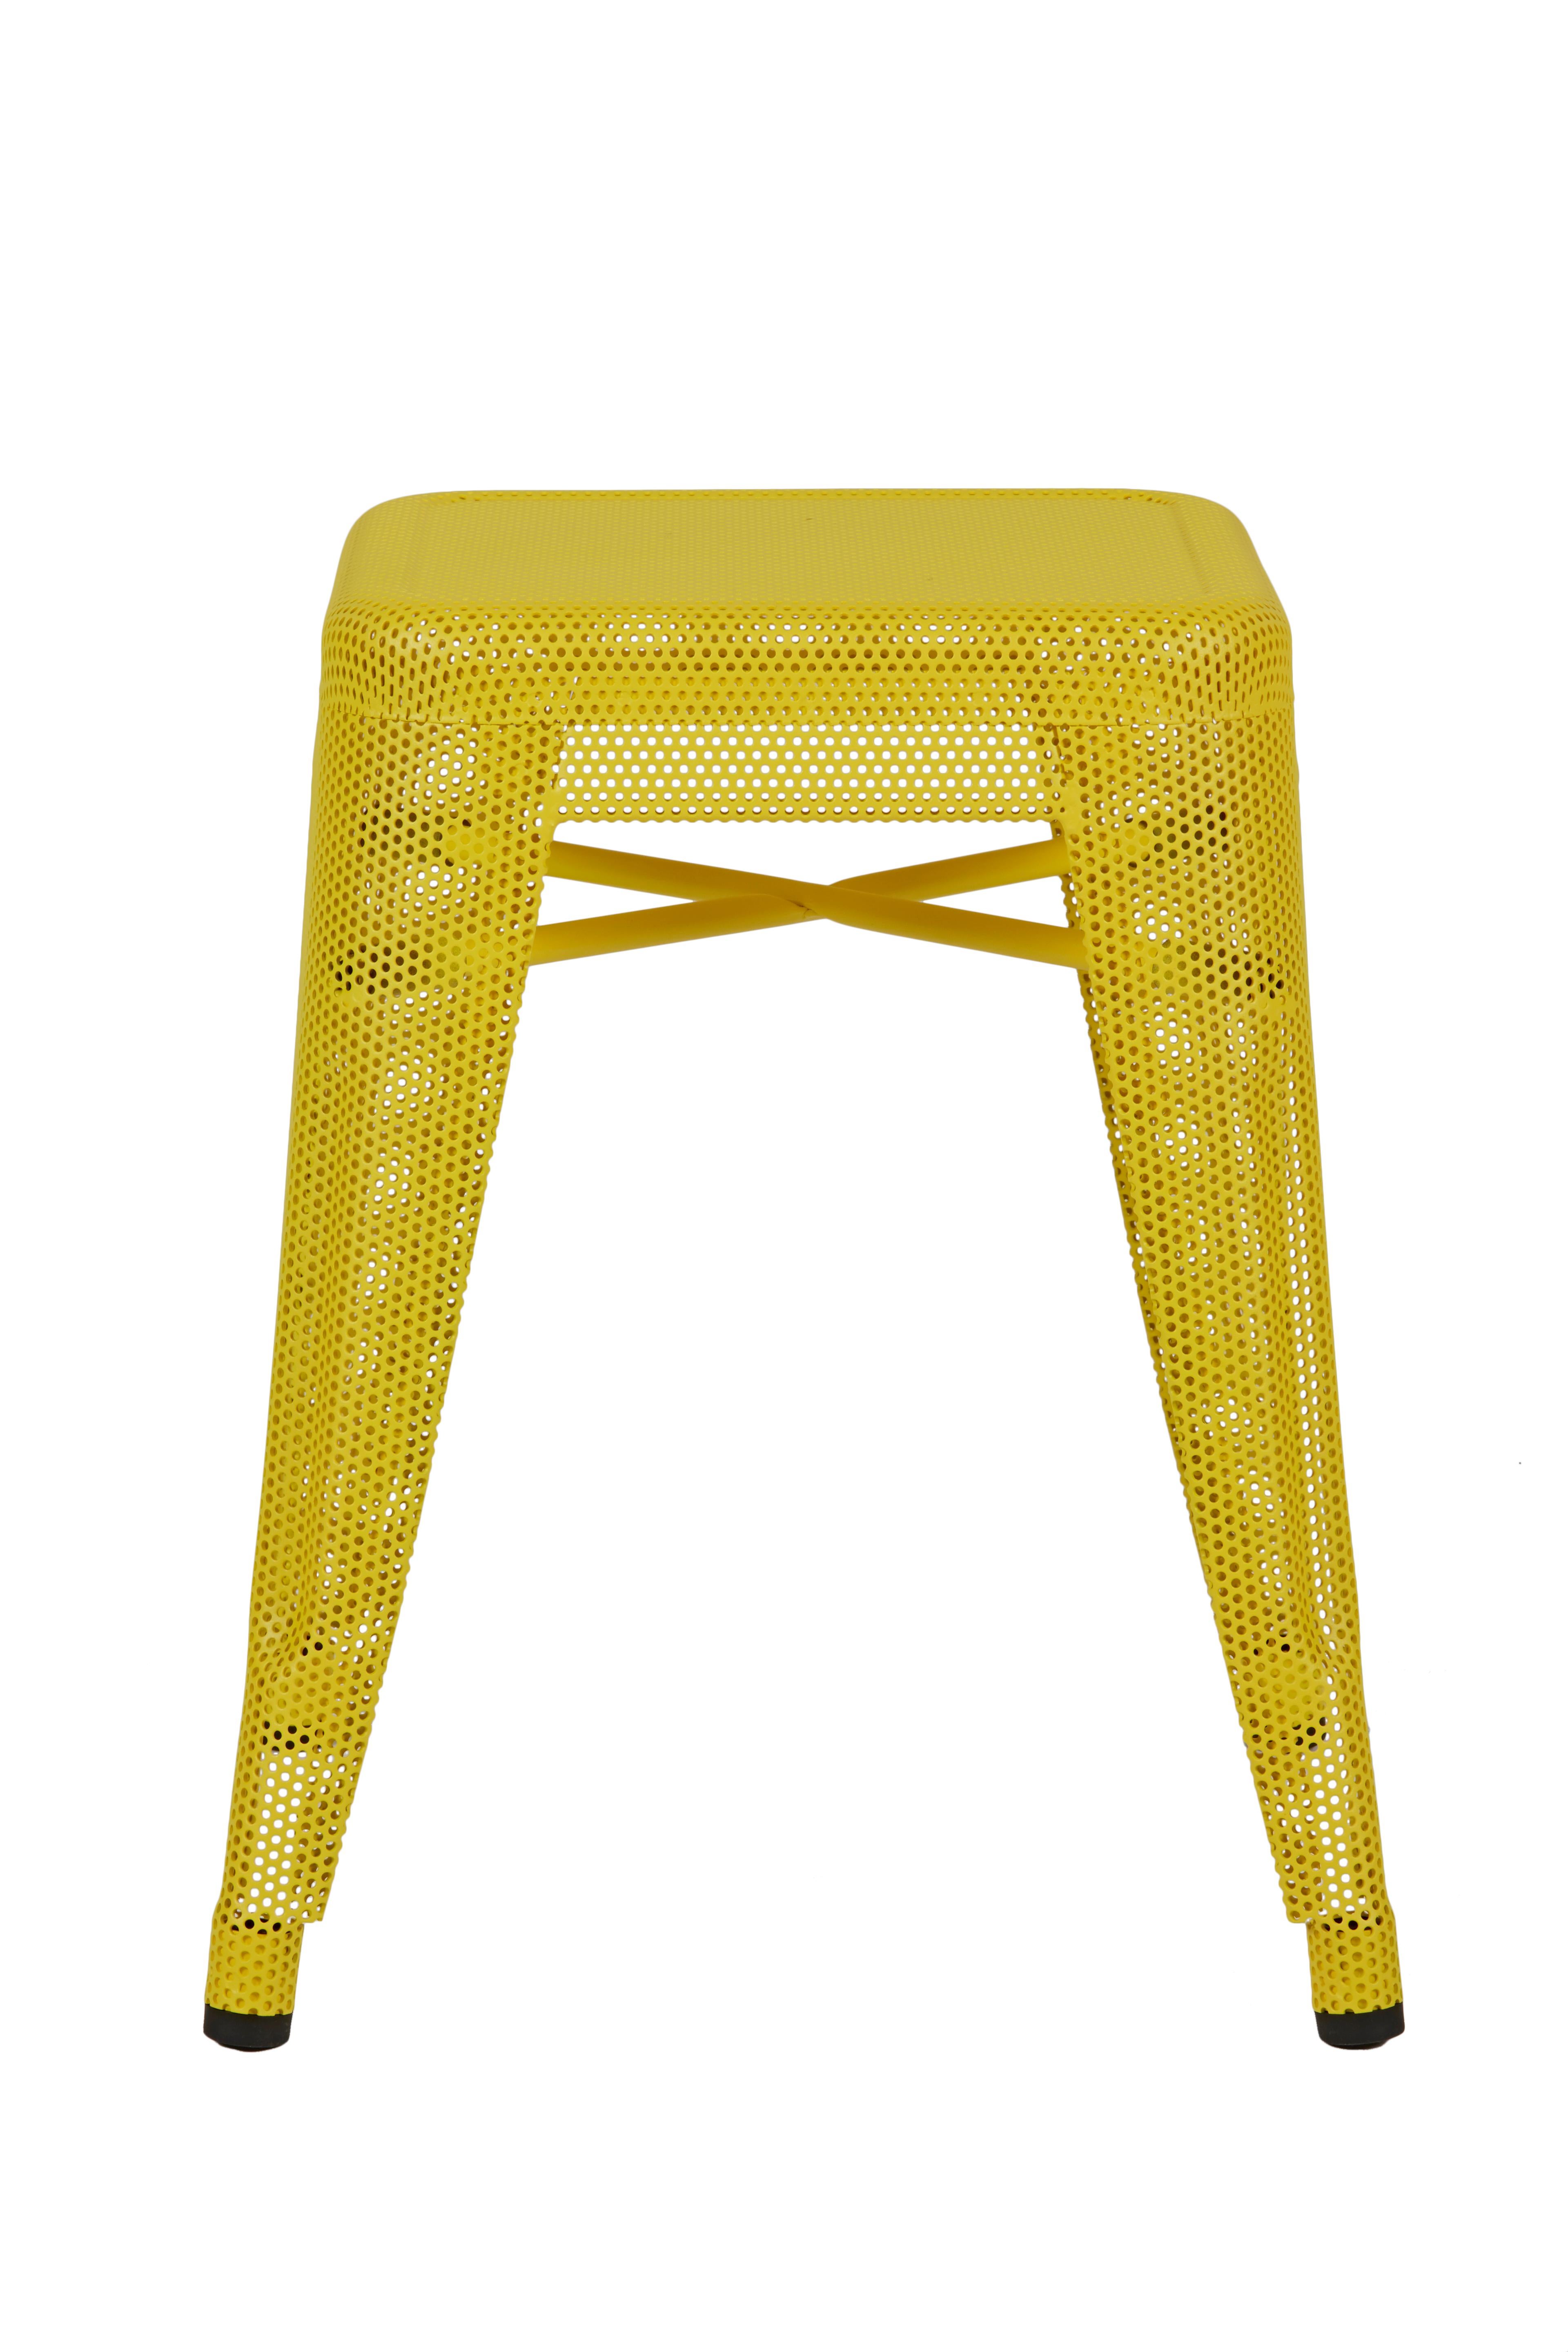 For Sale: Yellow (Citron) H Stool 45 Perforated in Essential Colors by Chantal Andriot and Tolix 2